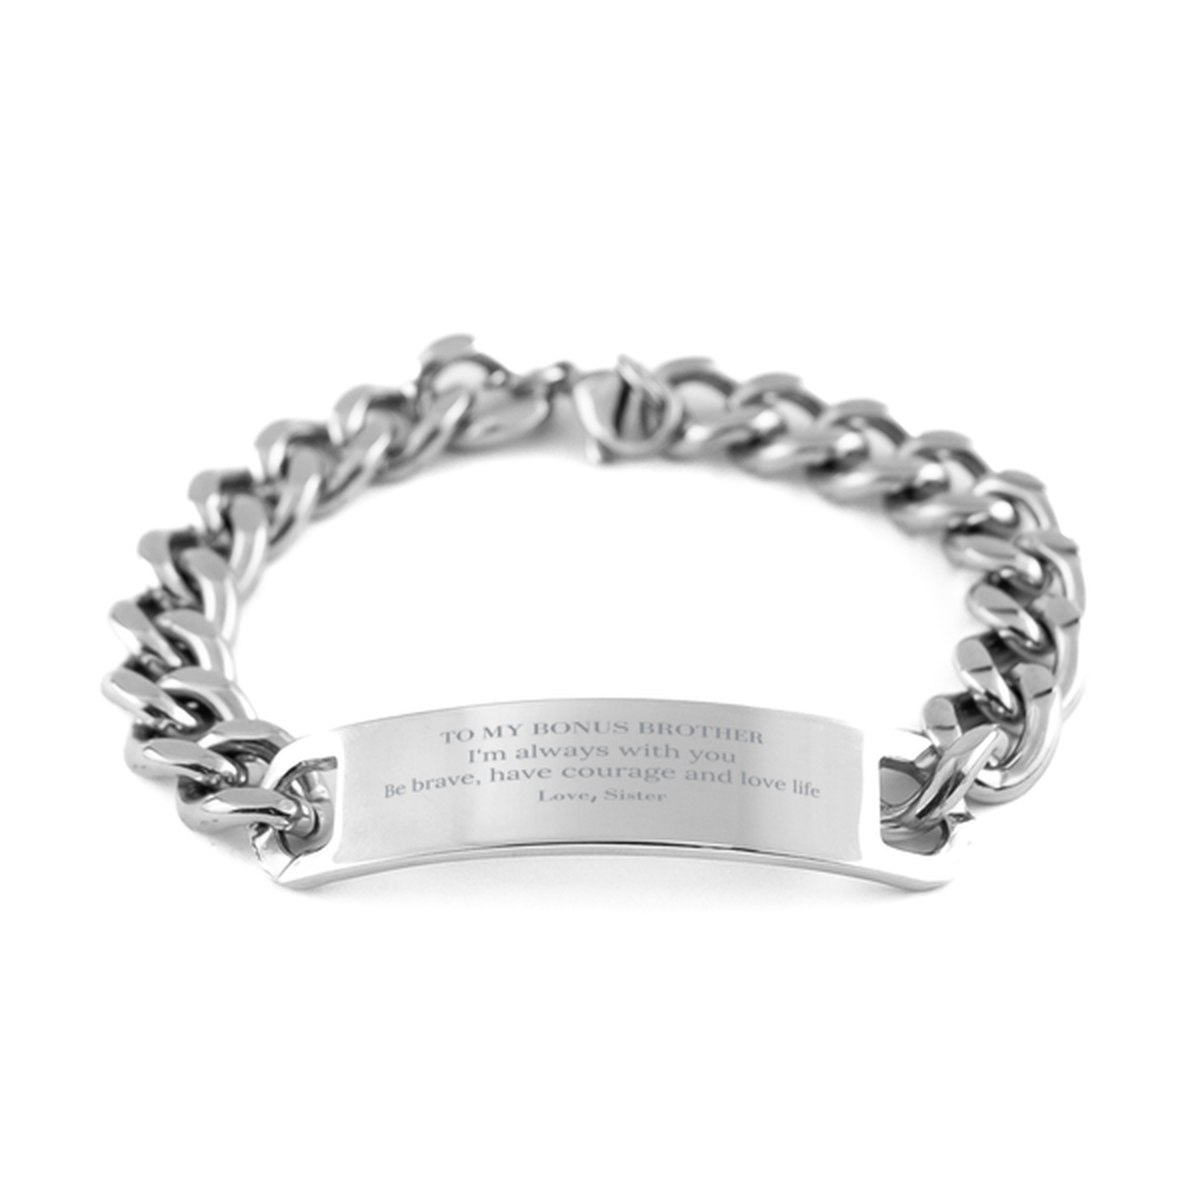 To My Bonus Brother Gifts from Sister, Unique Cuban Chain Stainless Steel Bracelet Inspirational Christmas Birthday Graduation Gifts for Bonus Brother I'm always with you. Be brave, have courage and love life. Love, Sister